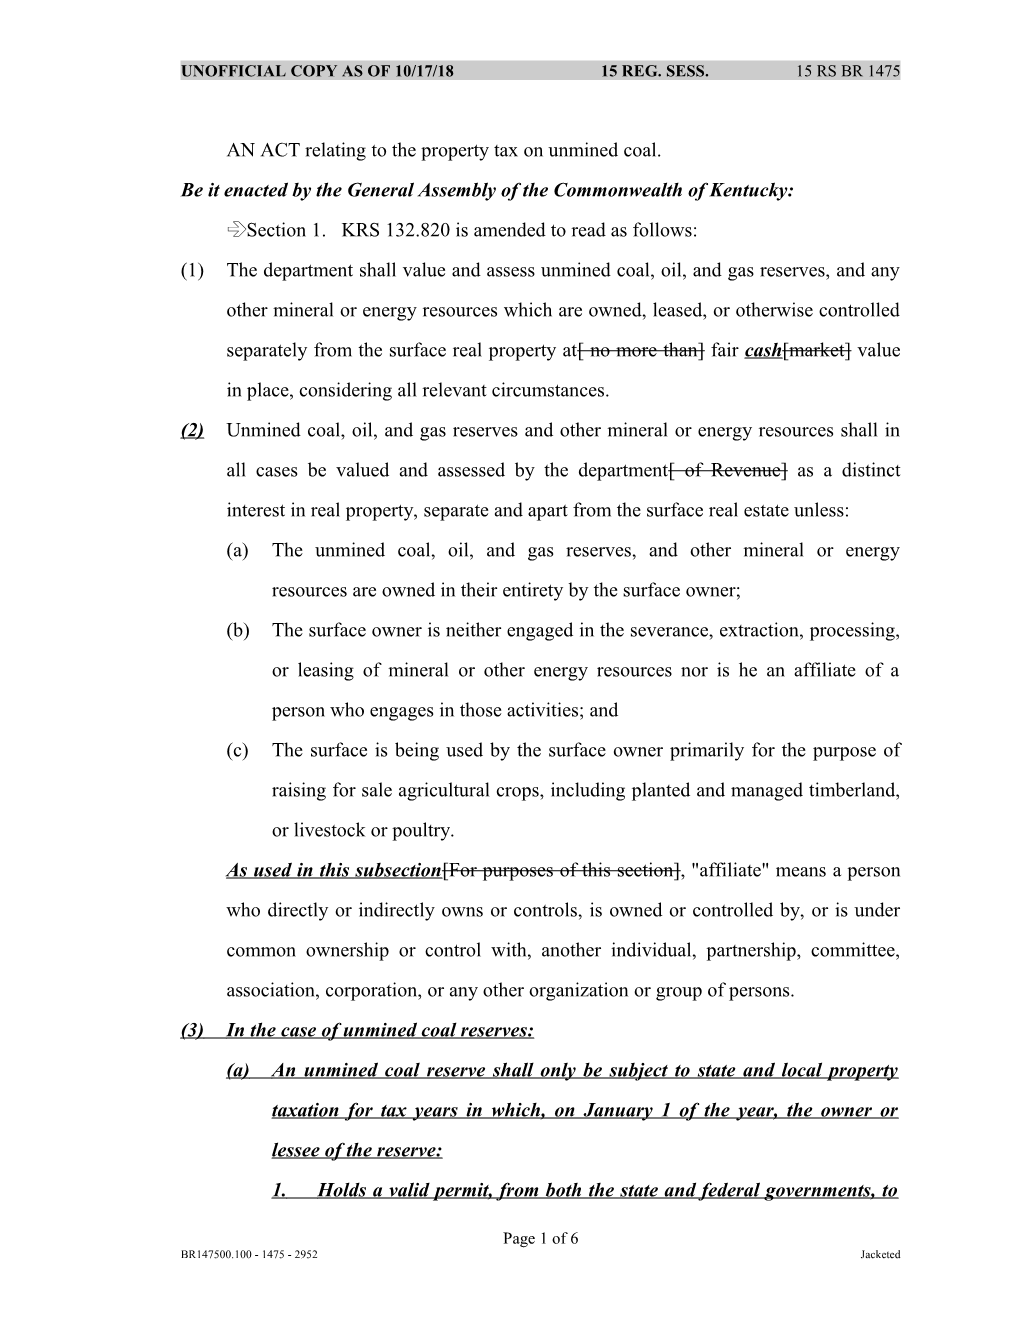 AN ACT Relating to the Property Tax on Unmined Coal